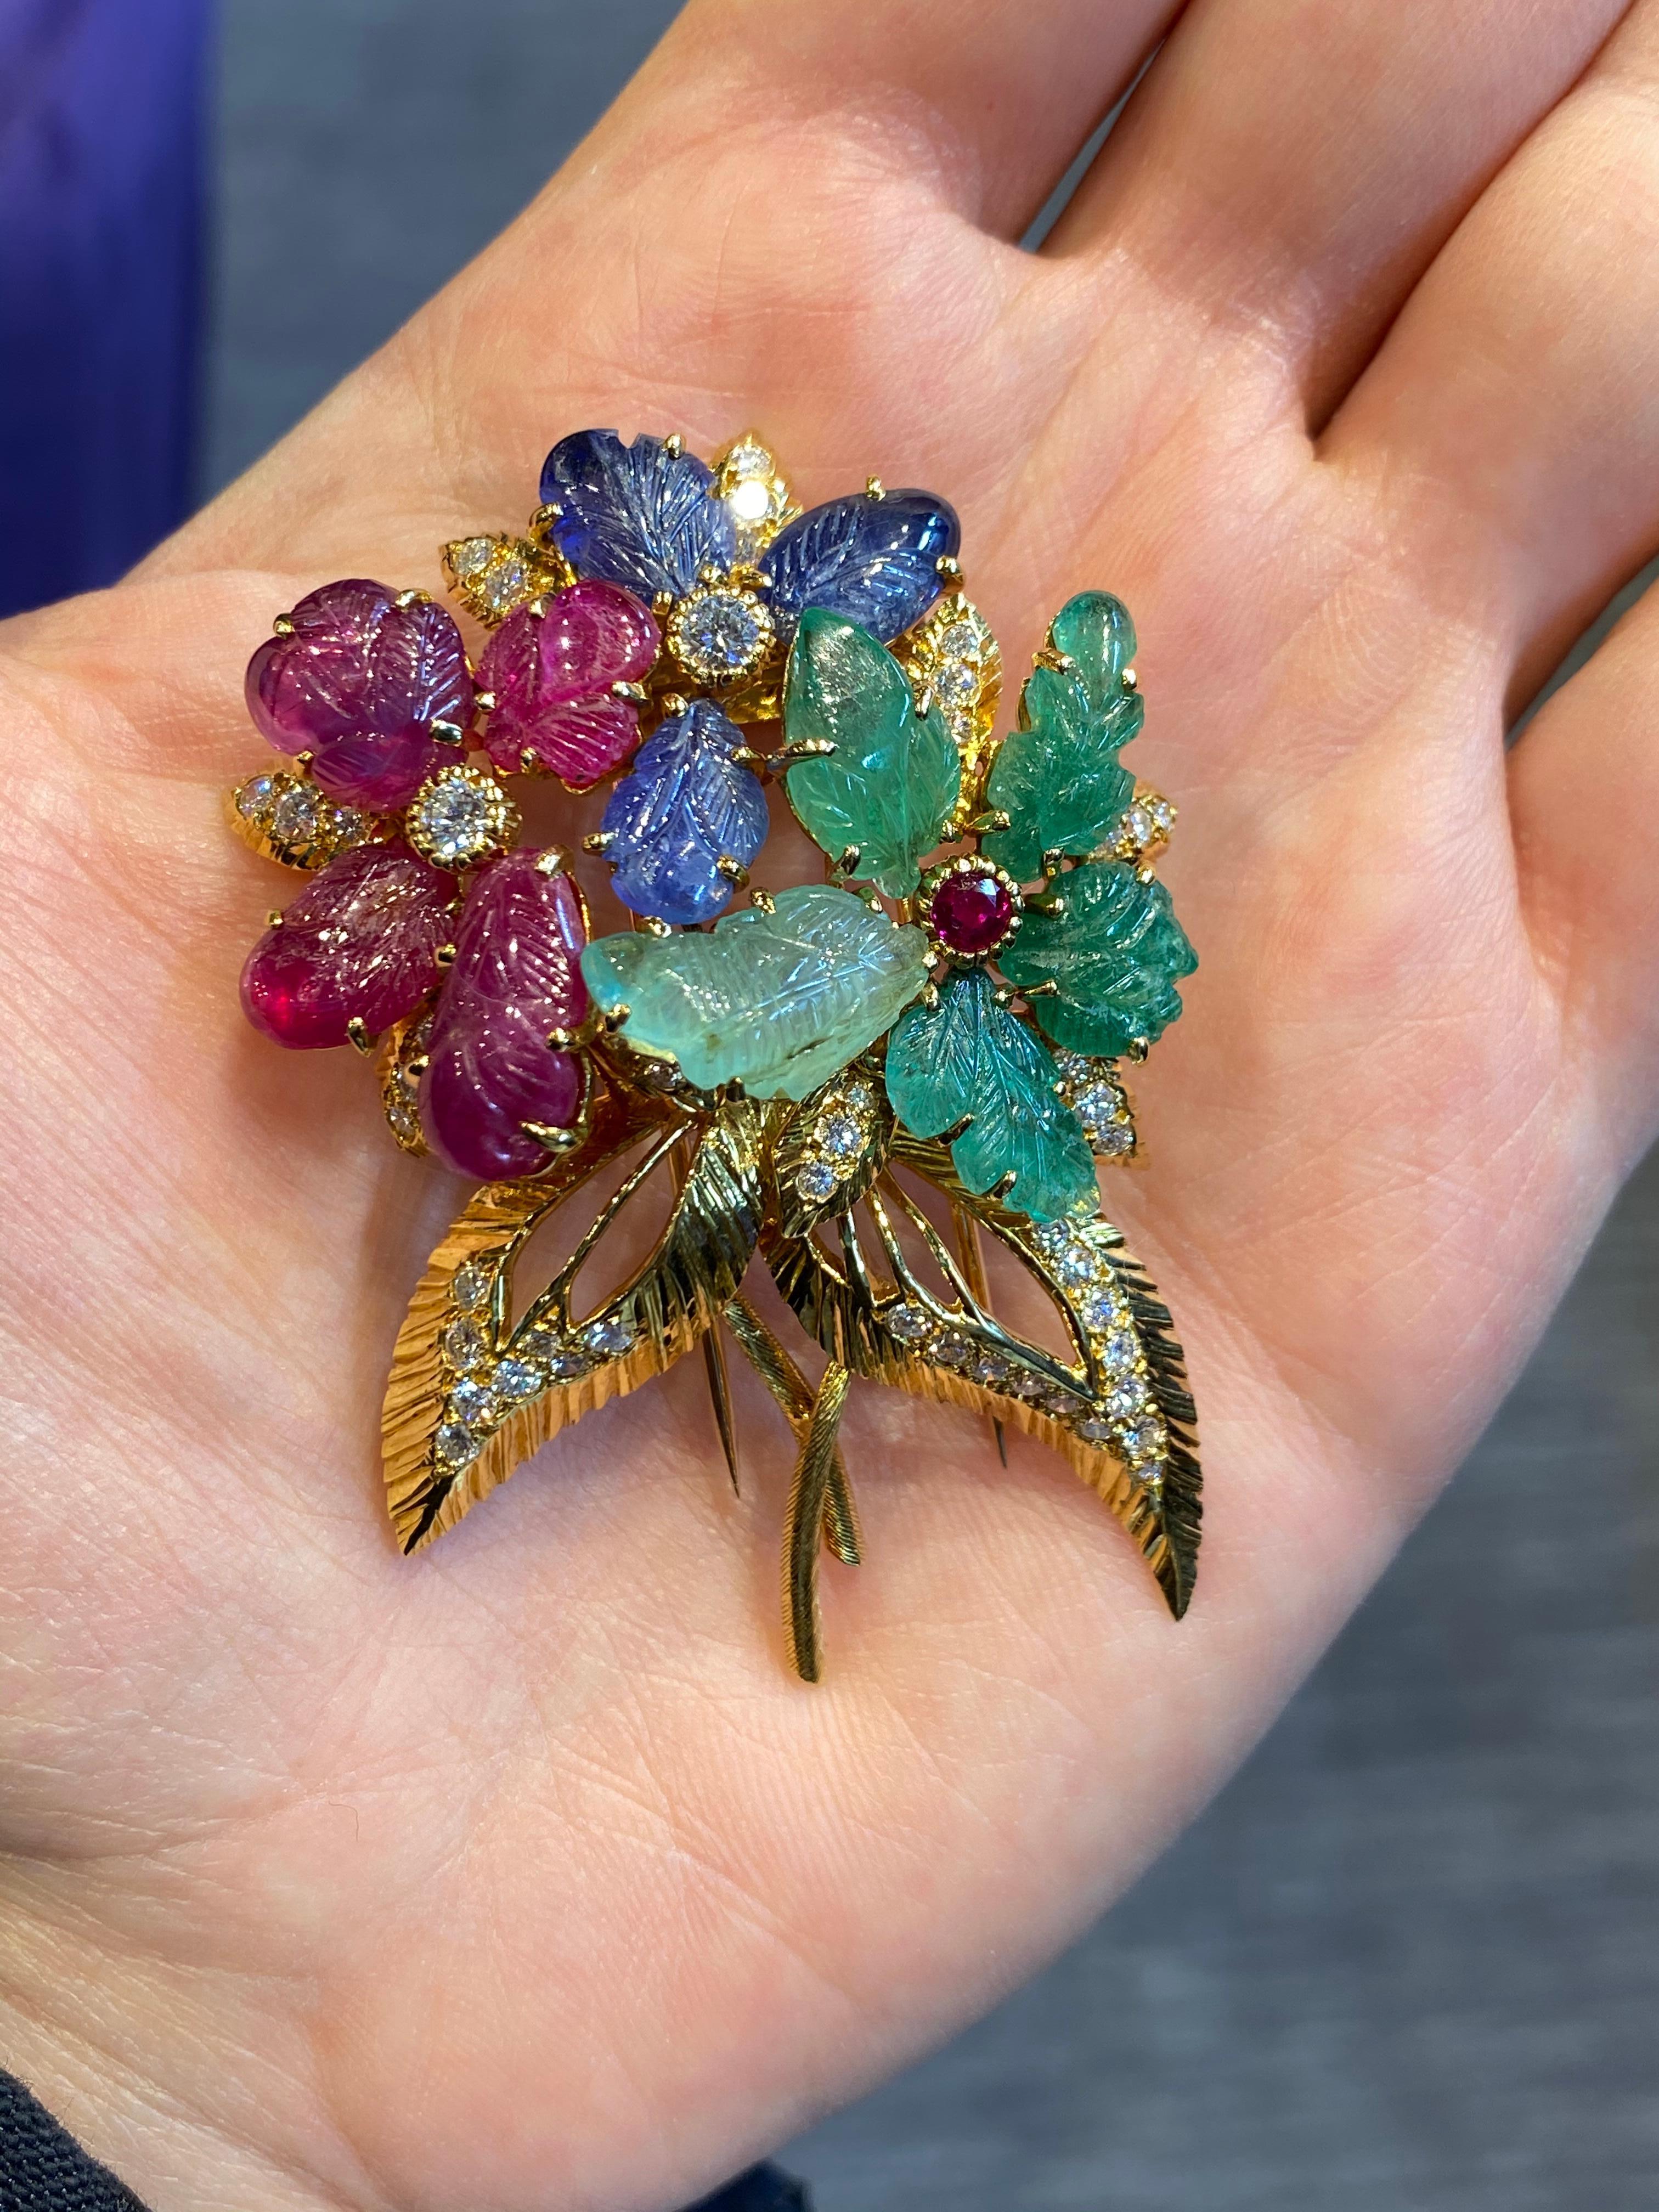 Cartier Tutti Frutti Flower Brooch

Made Circa 1953

Carved sapphires, emerald, and rubies accented with diamonds.

18K yellow gold  Signed Cartier, Paris, numbered, with Cartier maker's mark.

Measurements: 2 3/8 x 1 3/4 inches.